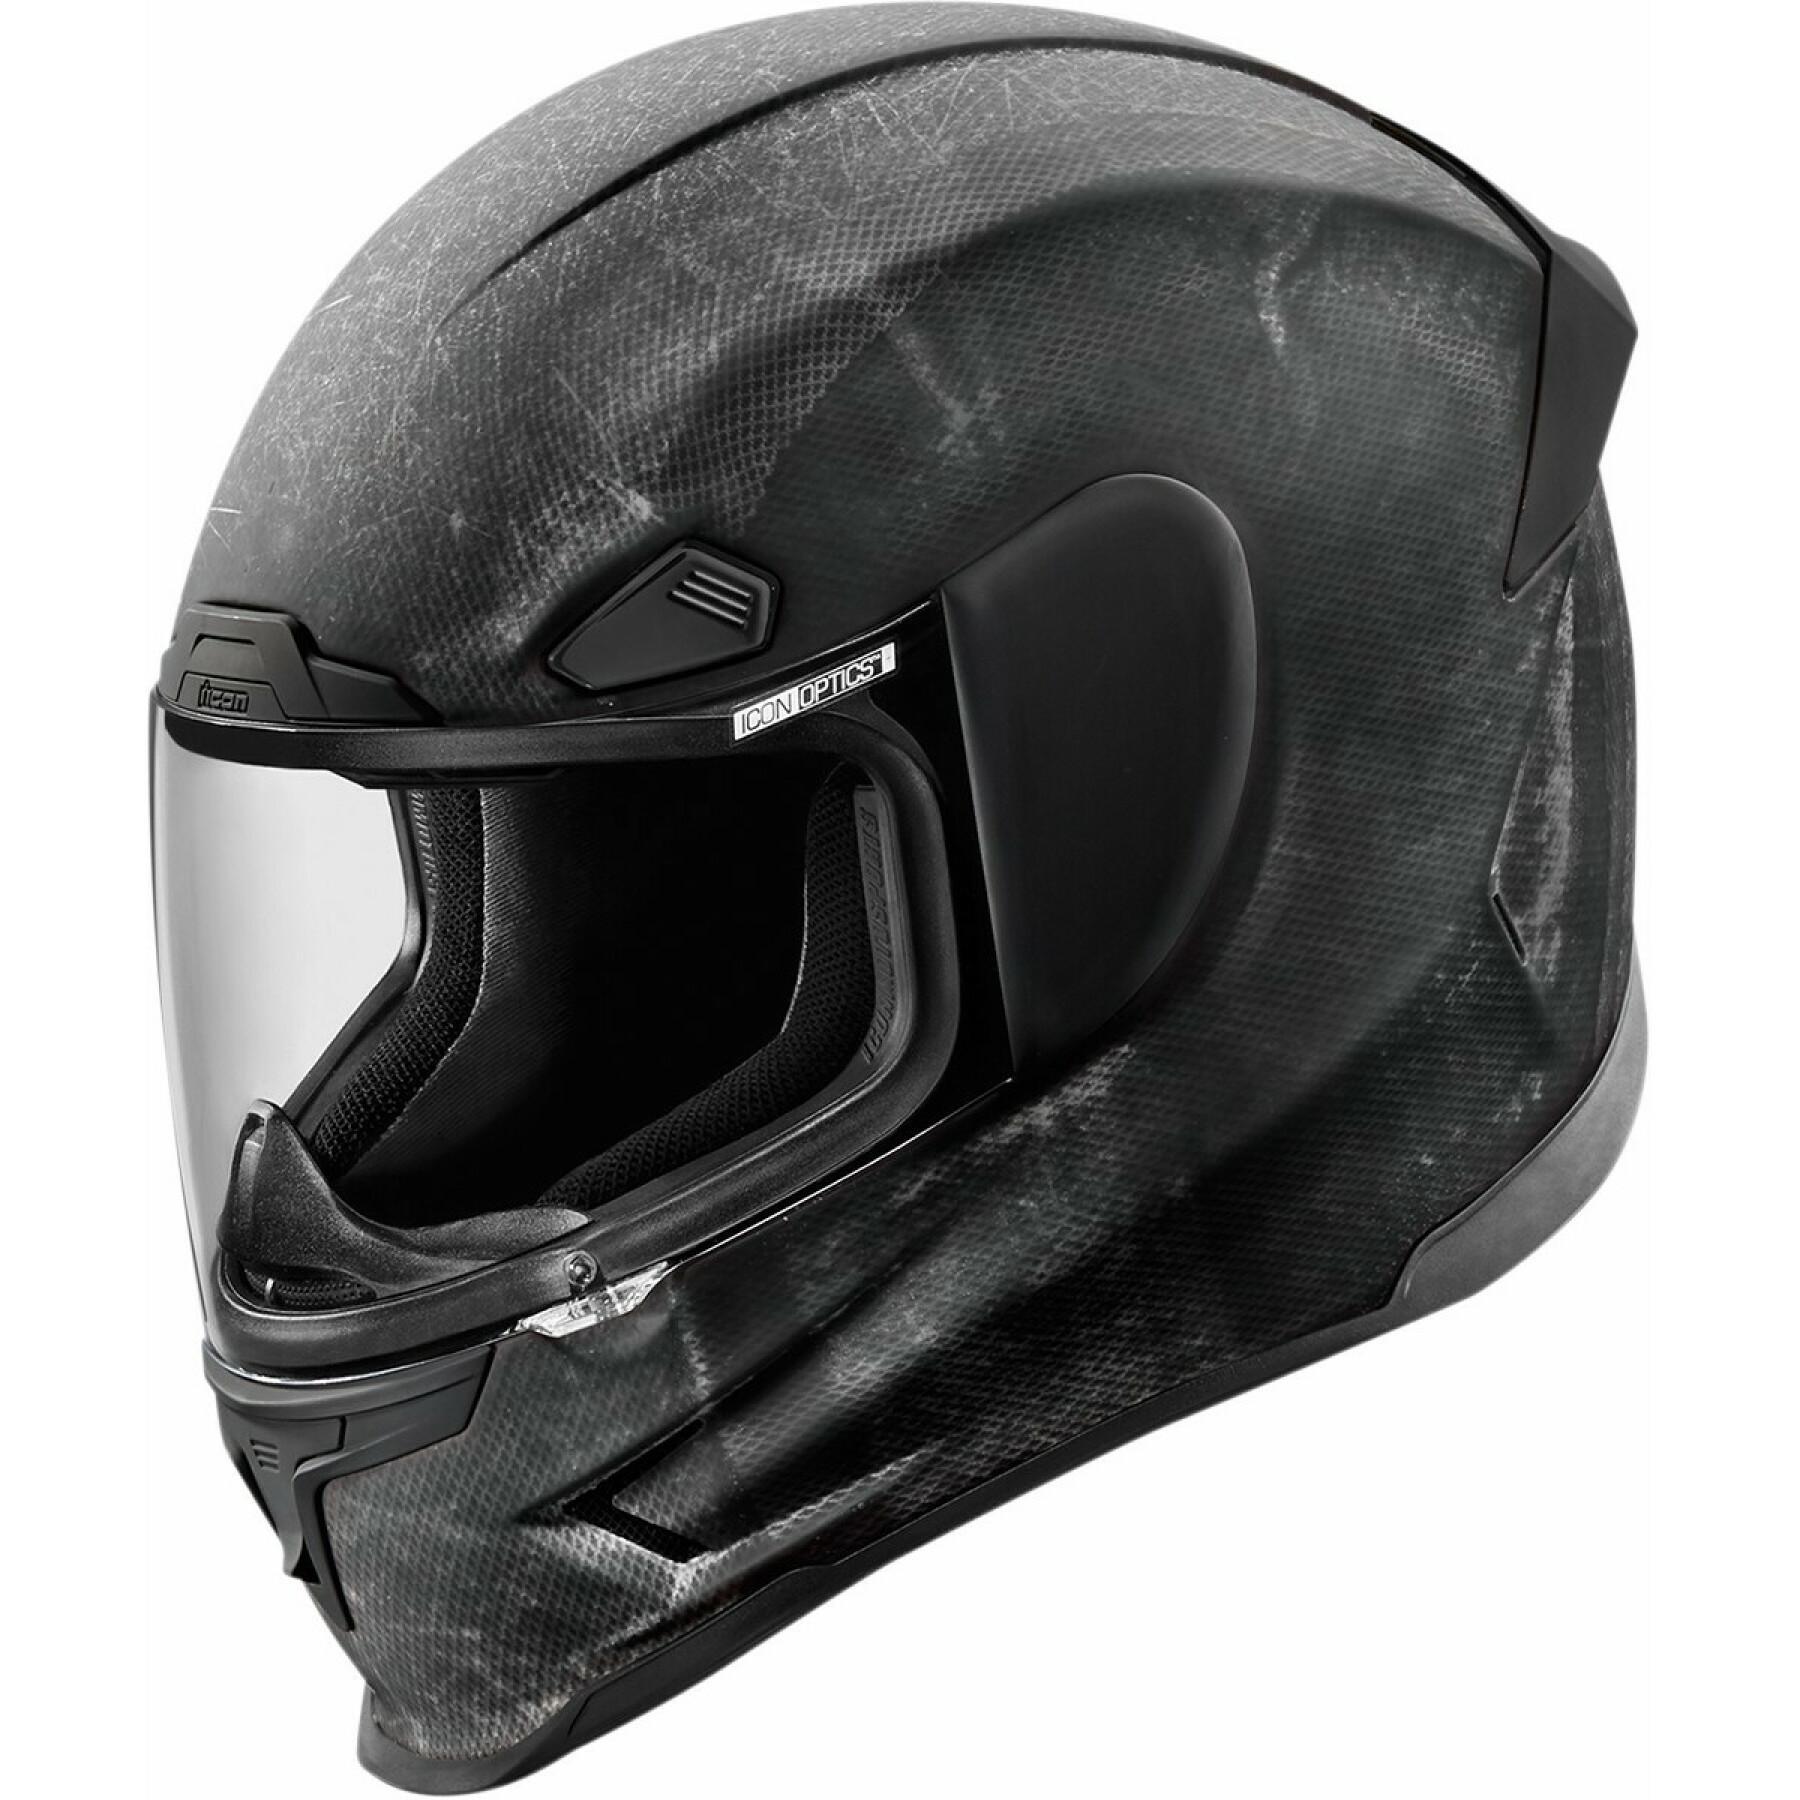 Full face motorcycle helmet Icon Airframe Pro Construct